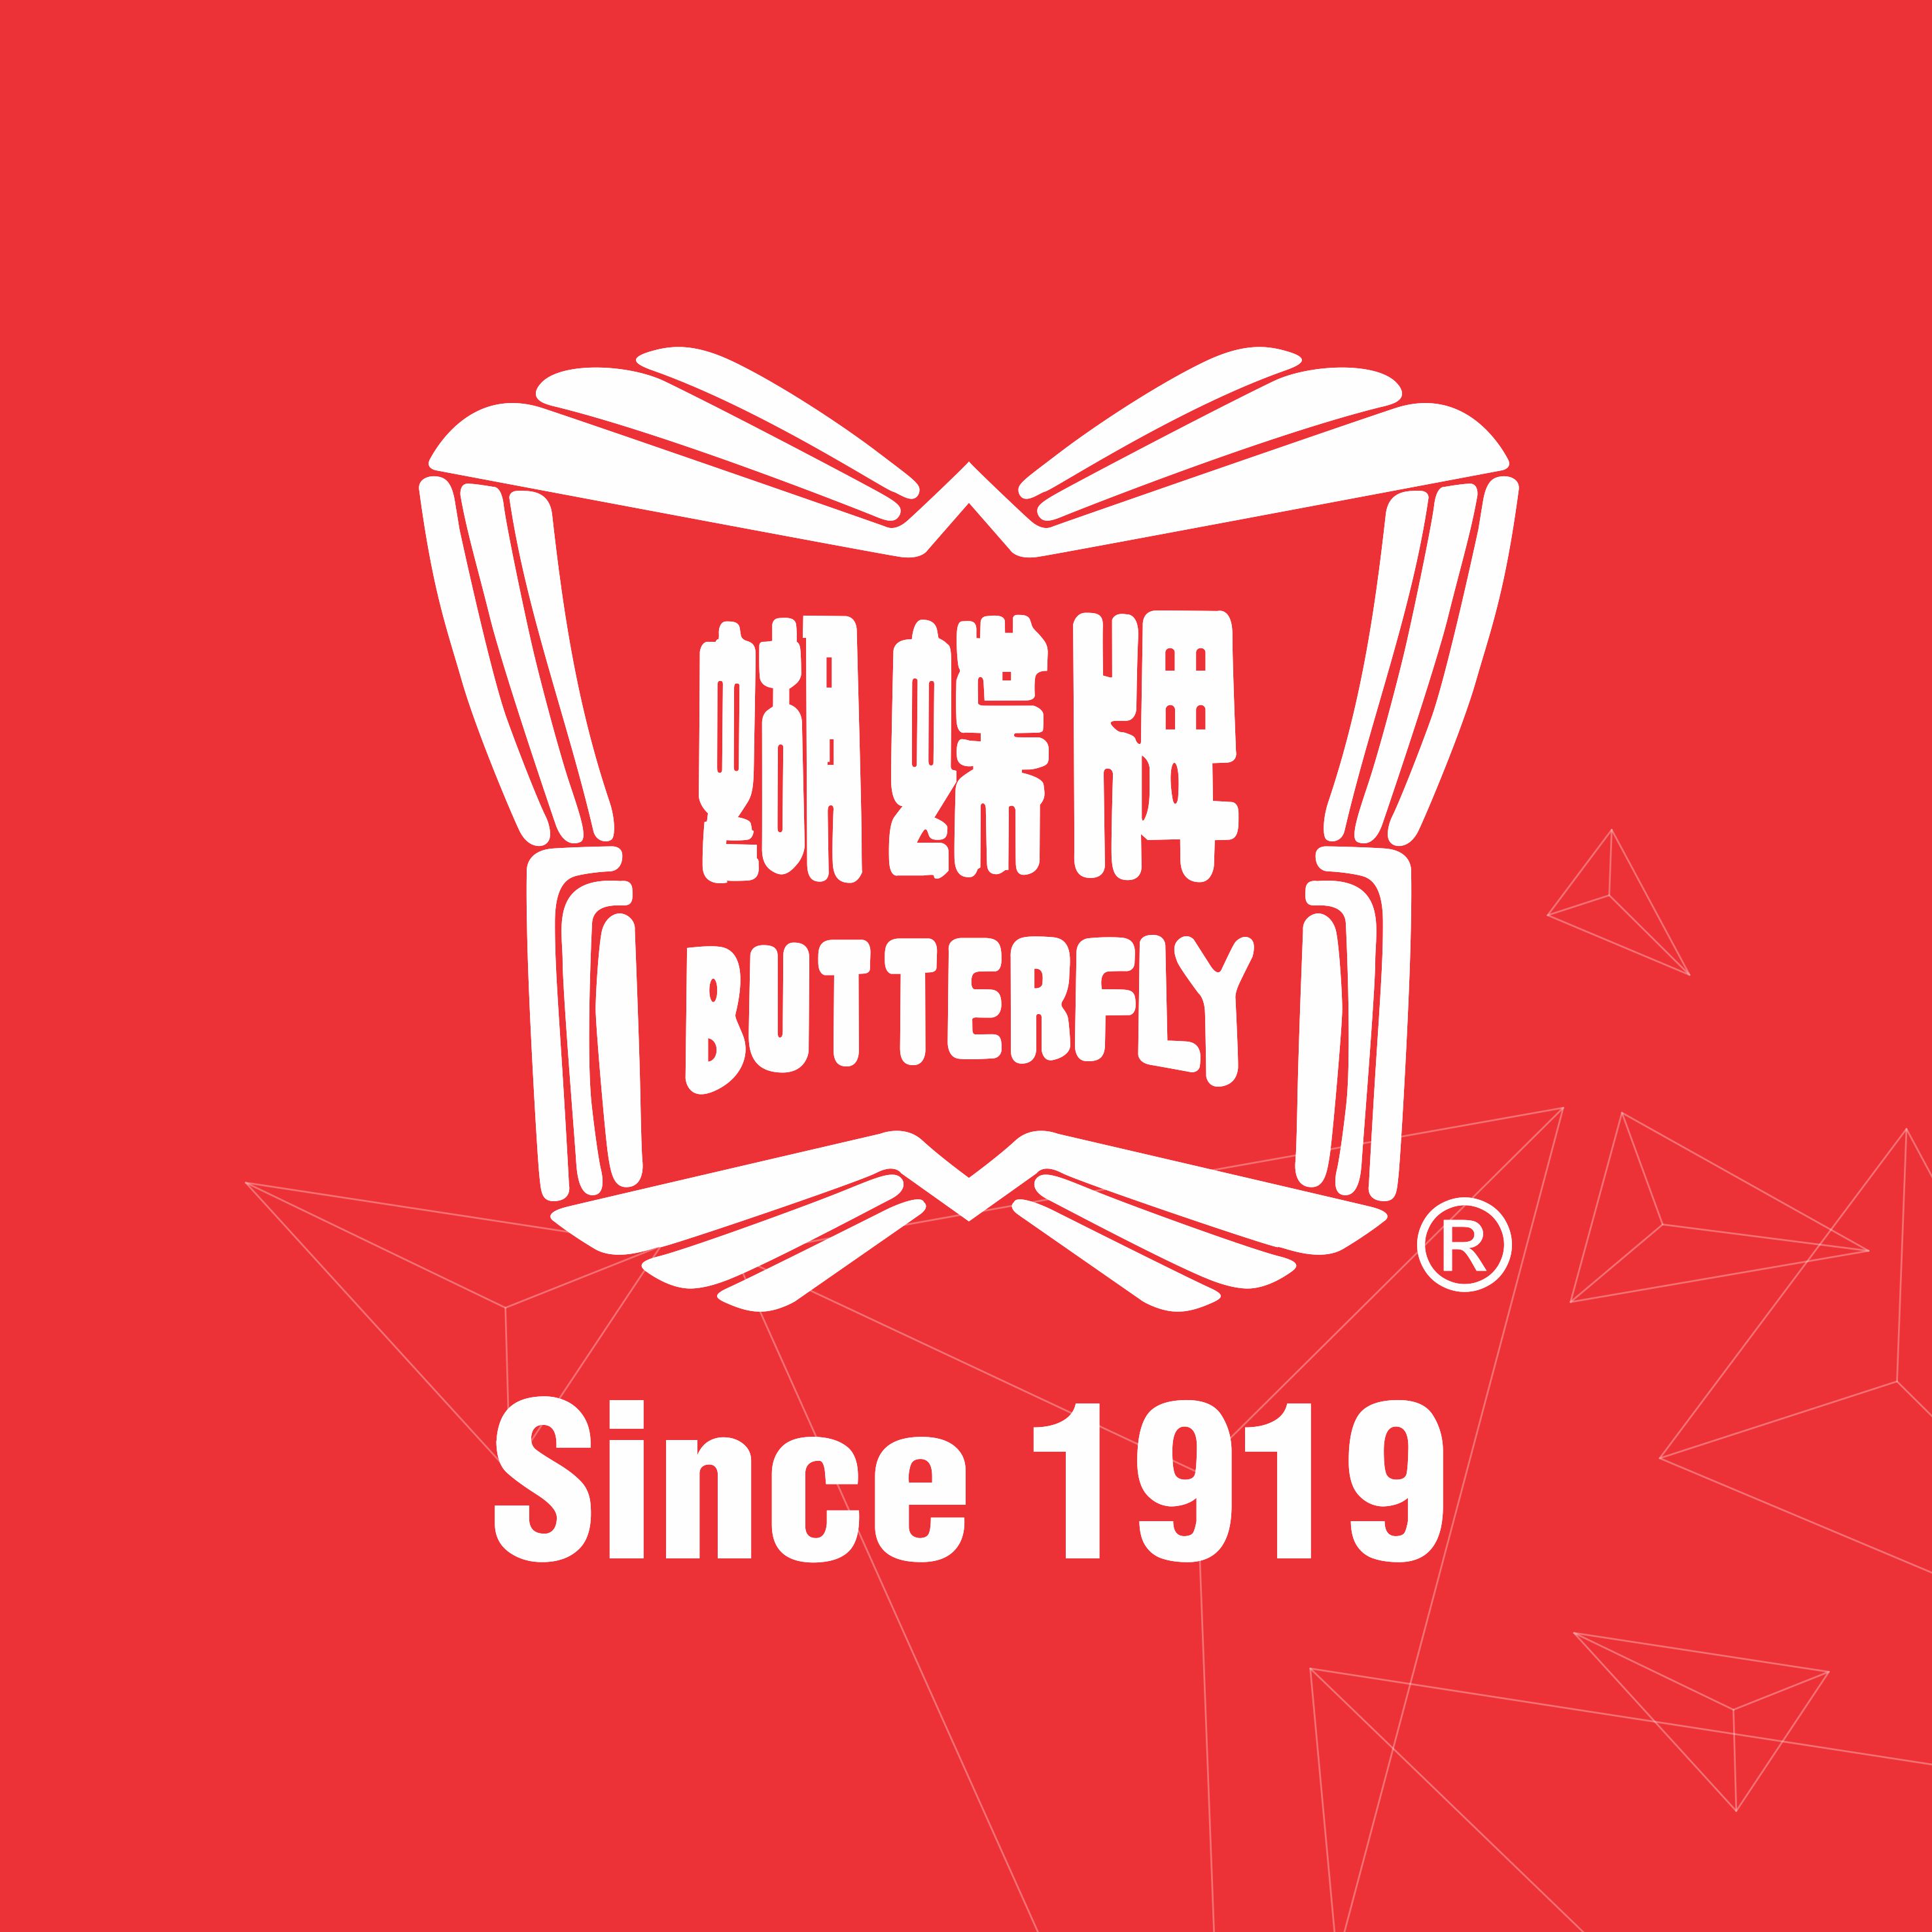 Butterfly Indonesia Official Store